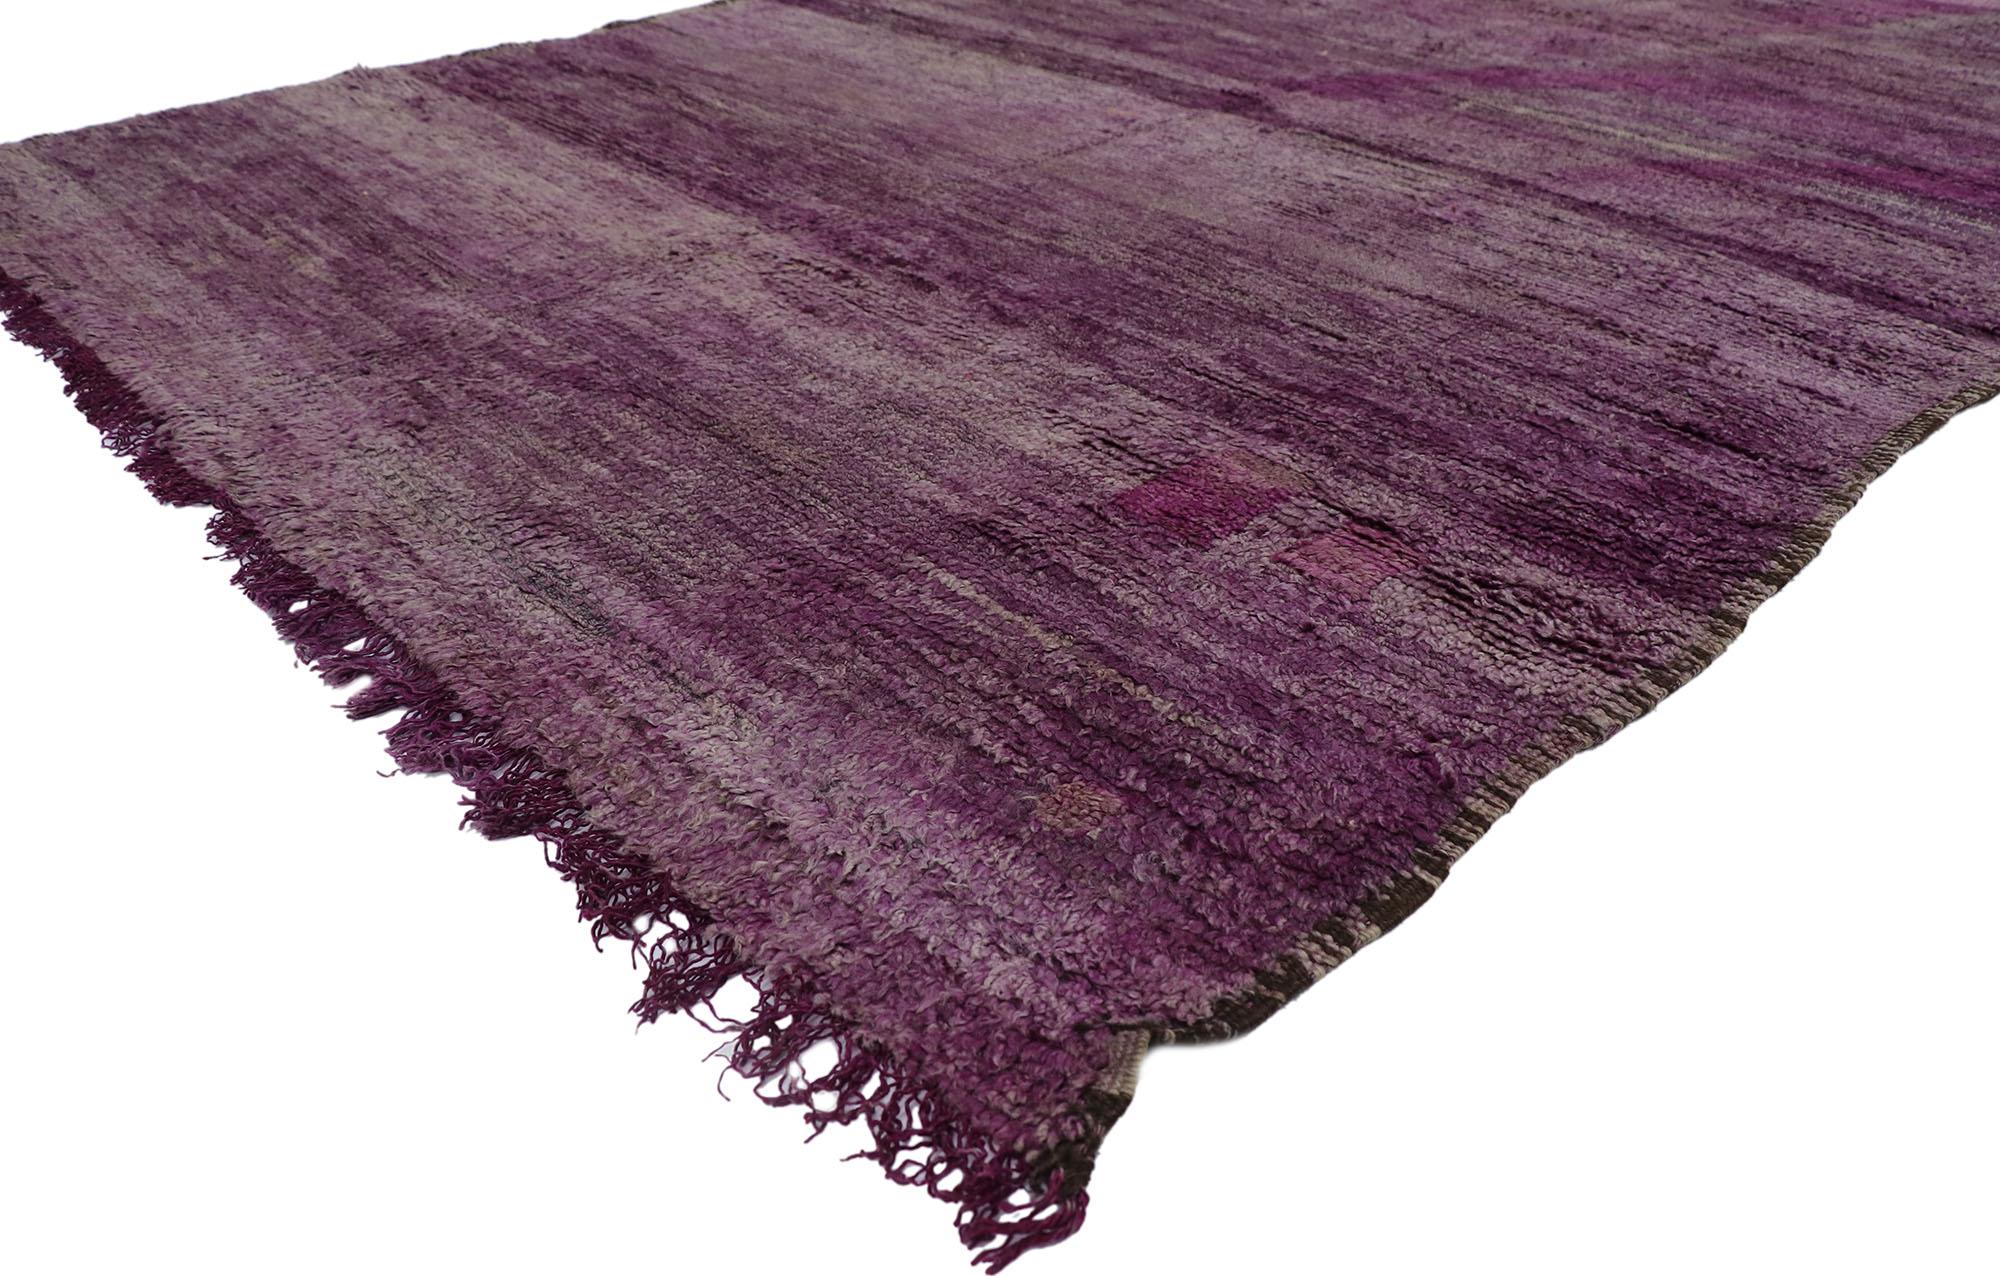 21492, vintage Berber Beni Mrirt Moroccan rug with Bohemian style. With its simplicity, plush pile and Bohemian vibes, this hand knotted wool vintage Berber Beni Mrirt Moroccan rug is a captivating vision of woven beauty. Imbued with purple hues,